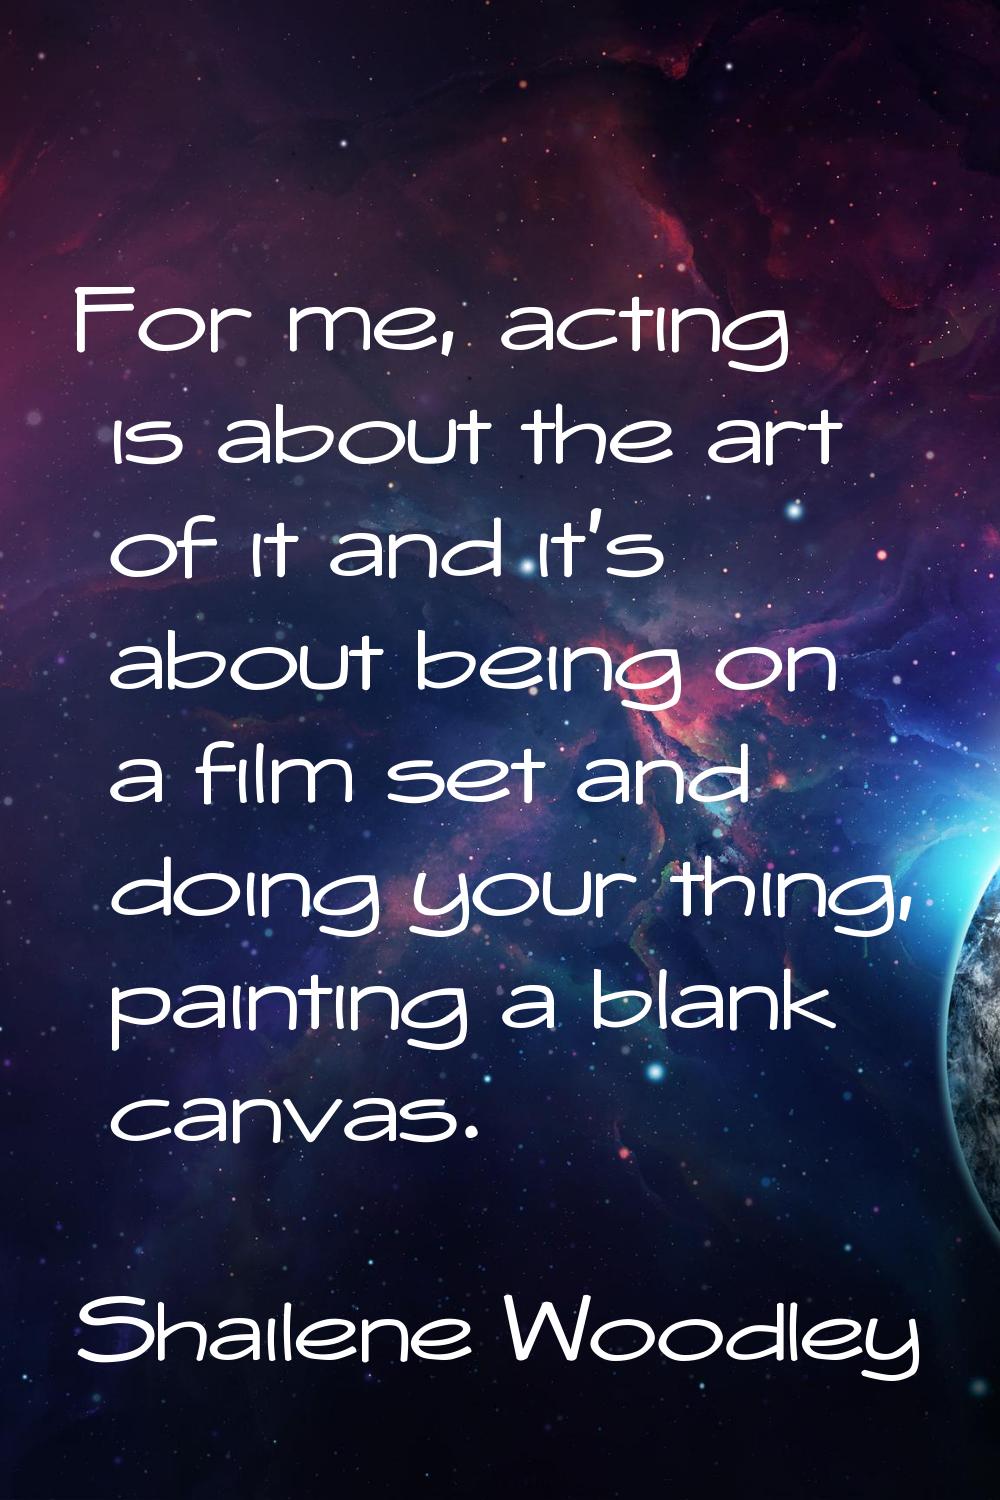 For me, acting is about the art of it and it's about being on a film set and doing your thing, pain